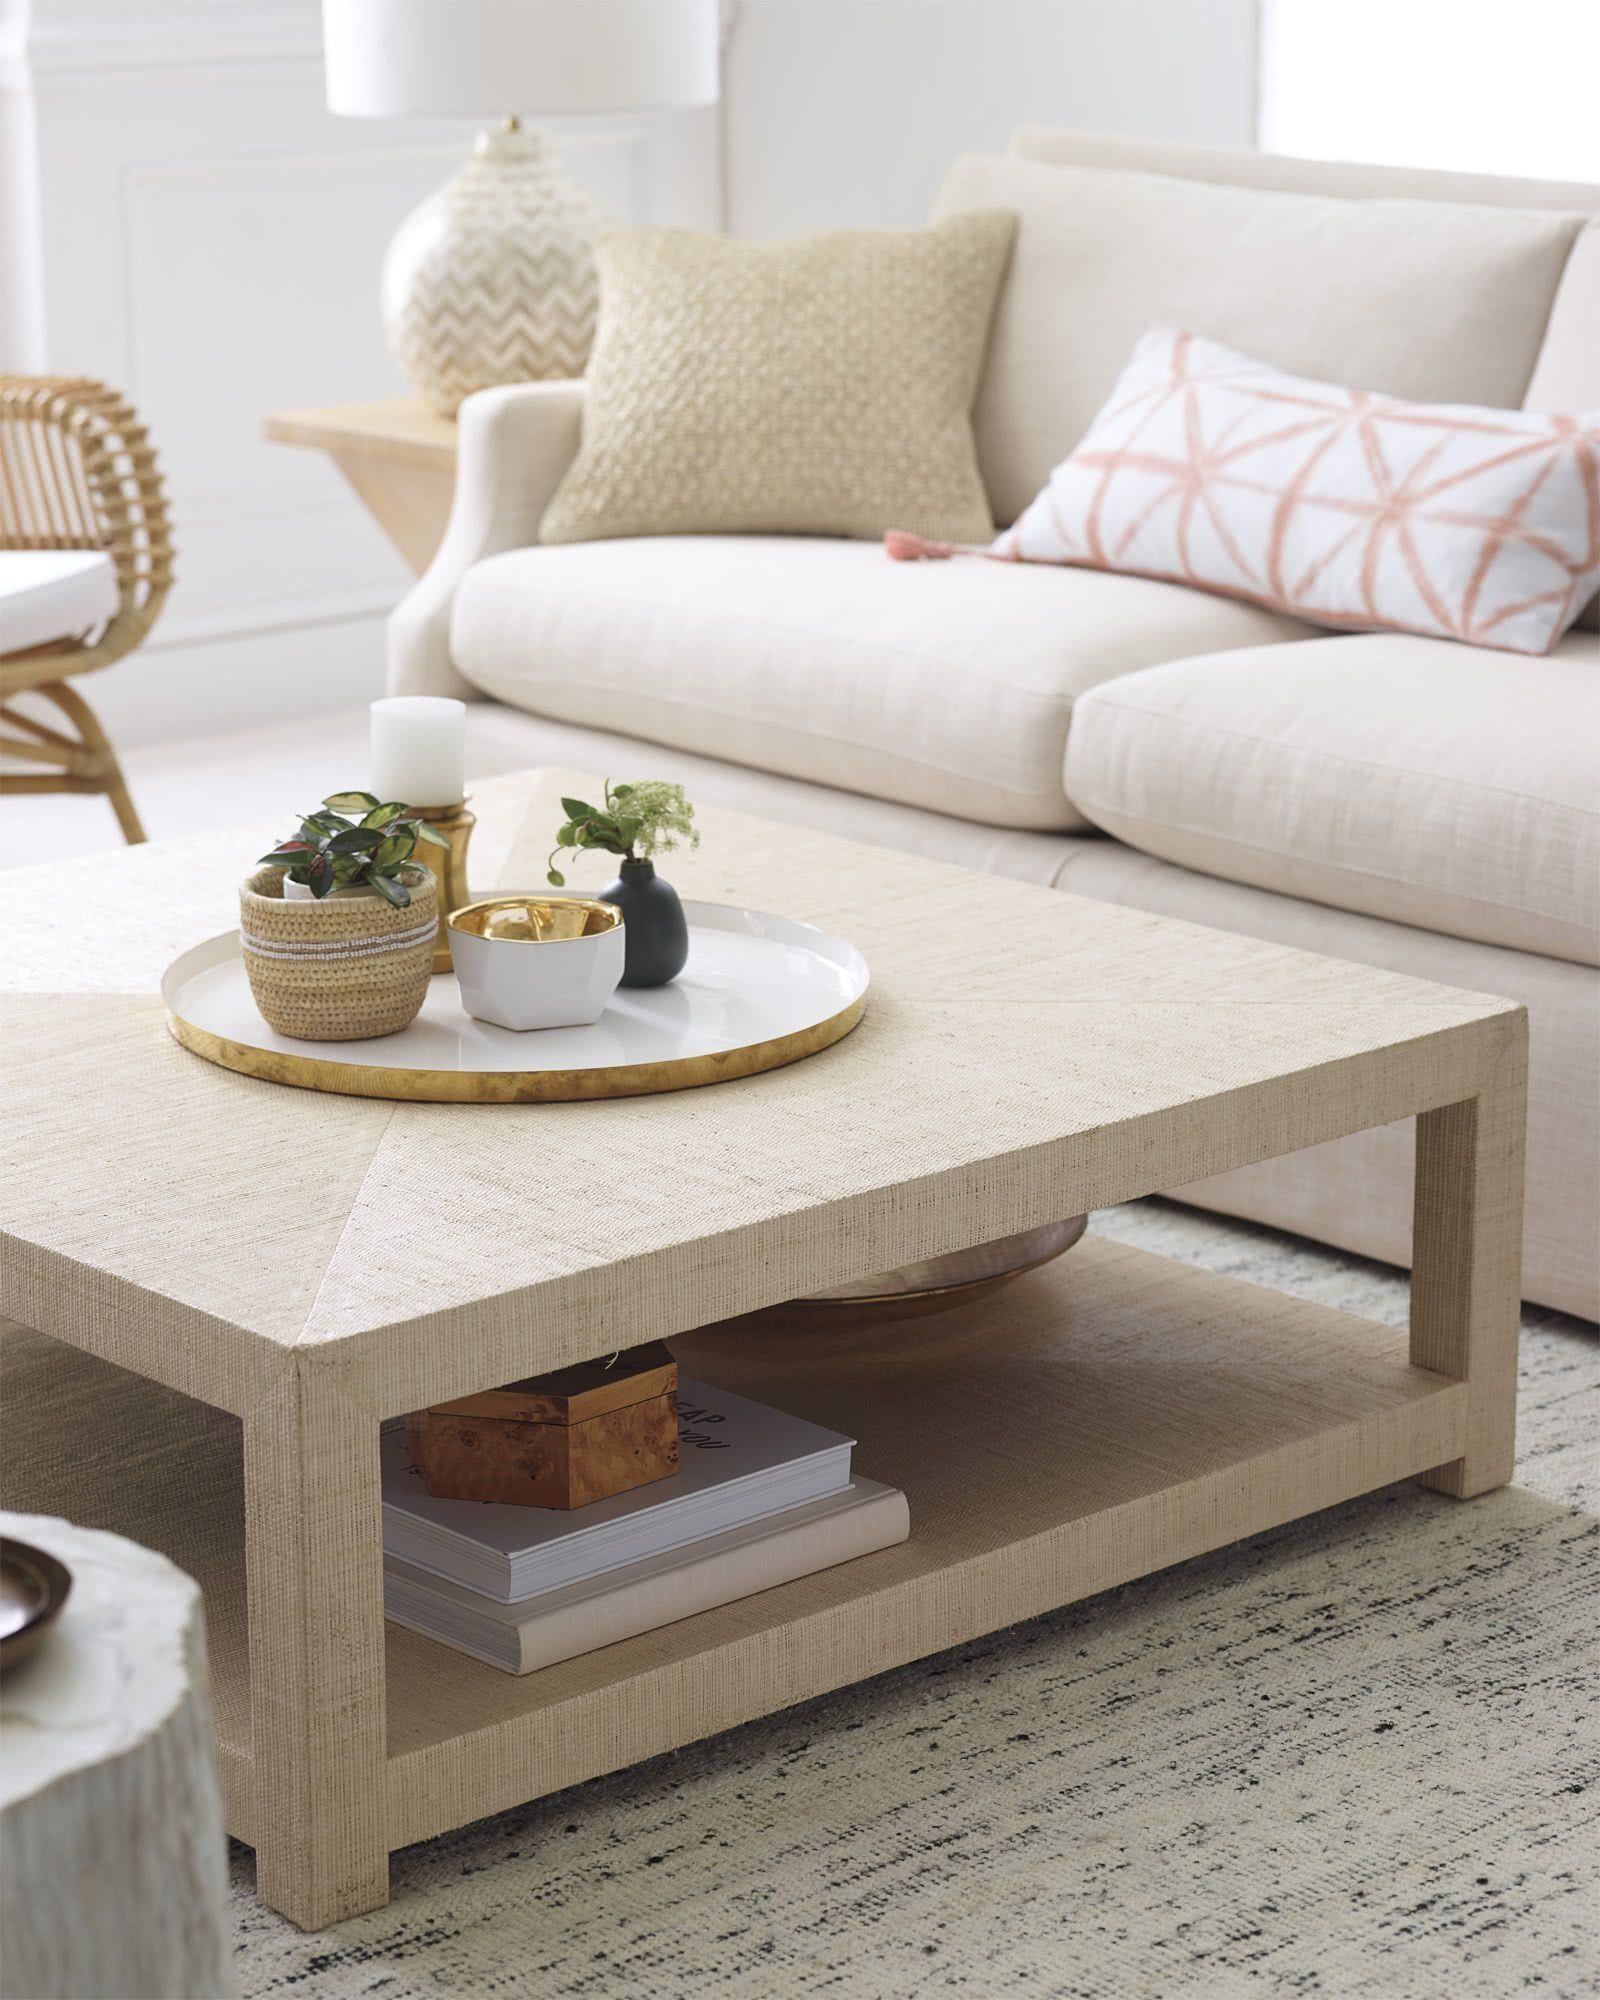 How To Decorate Your Square Coffee Table With Style – Coffee Table Decor Regarding Transitional Square Coffee Tables (Gallery 8 of 20)